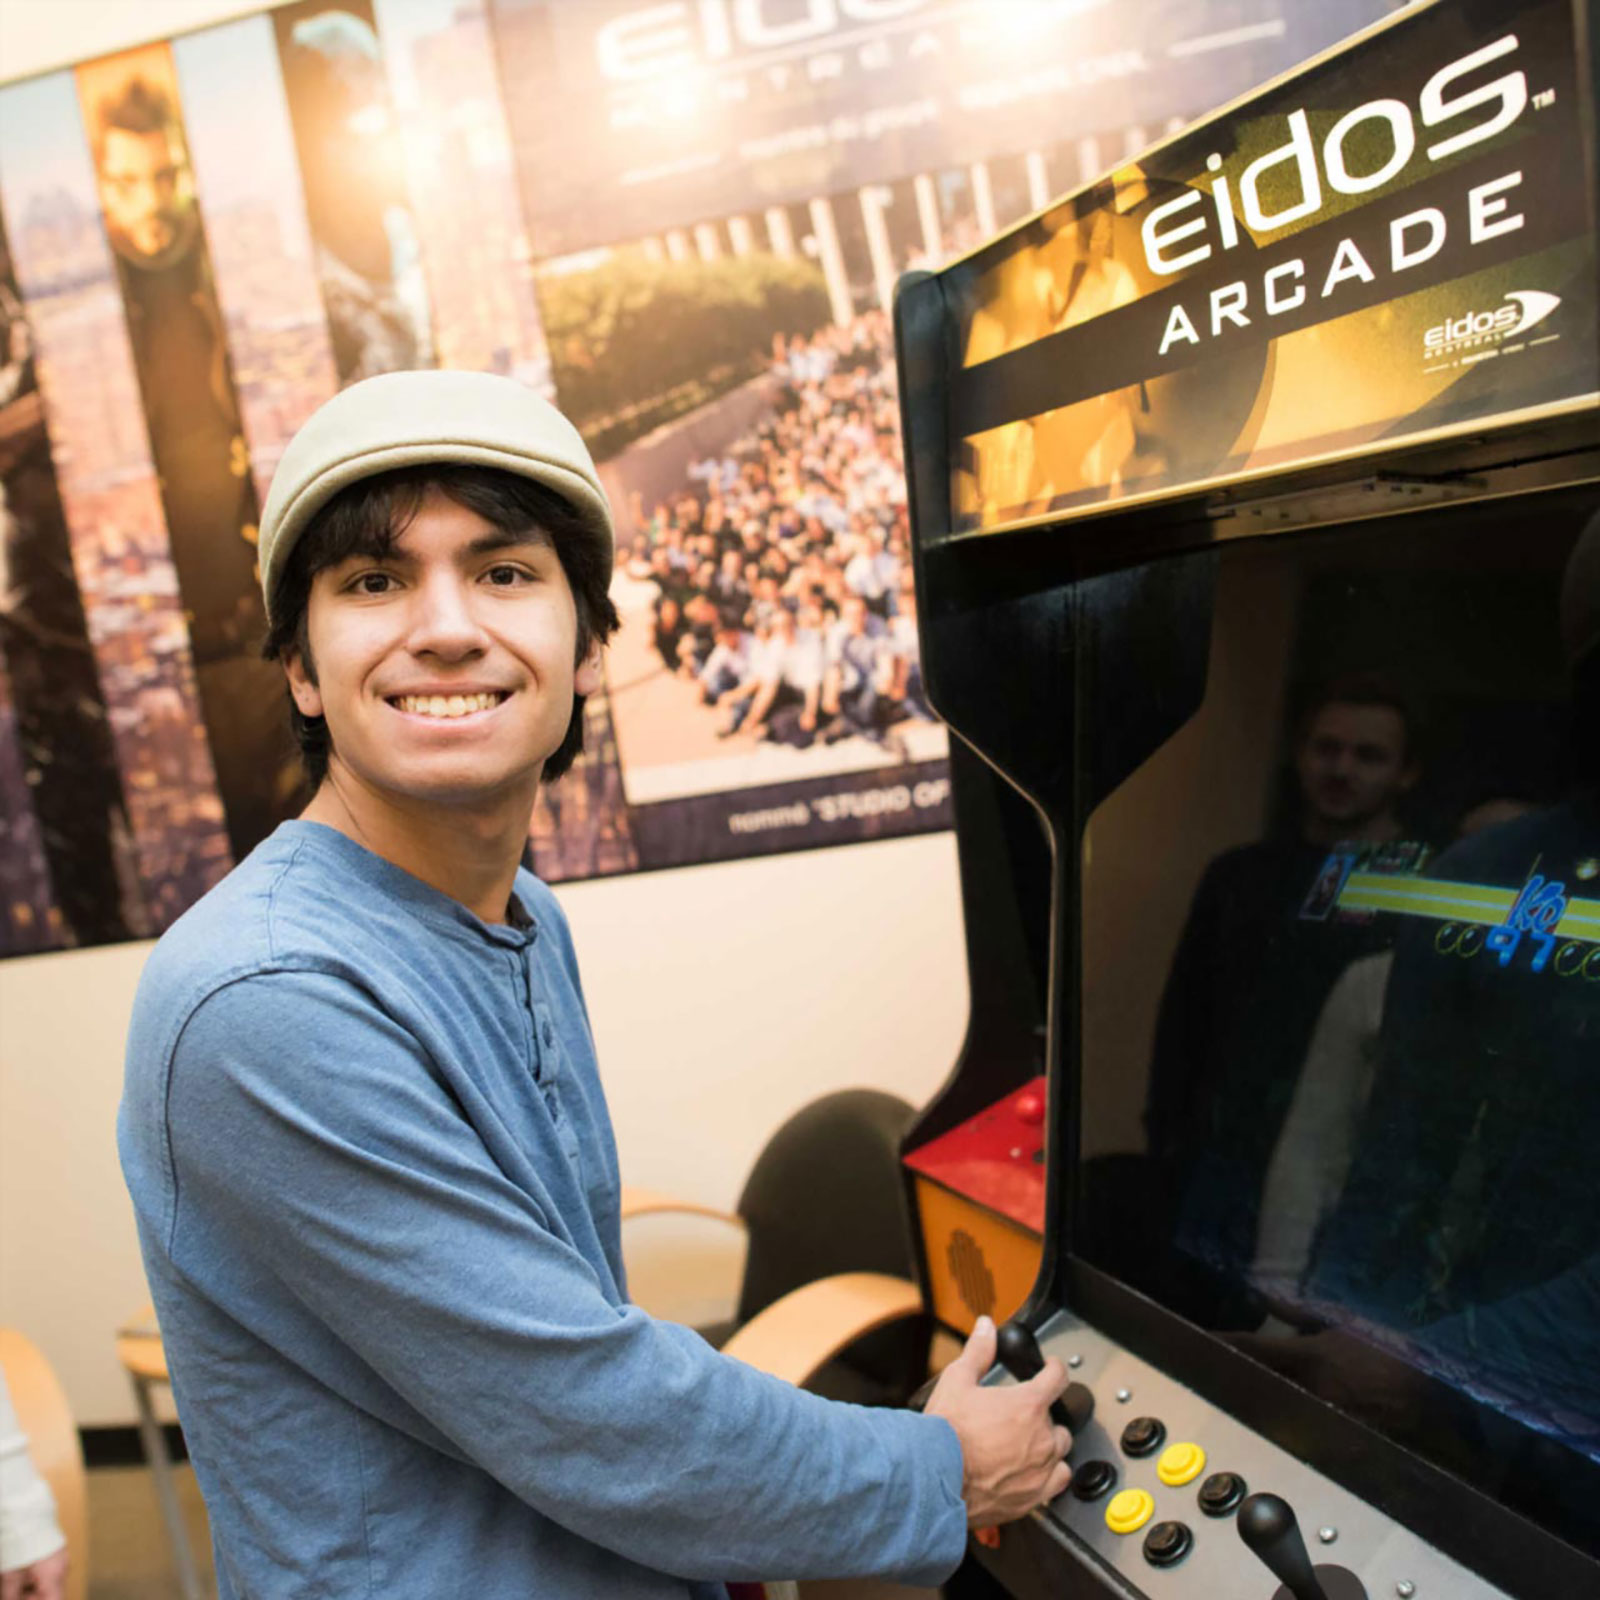 A student playing an arcade game, looking towards the camera and smiling.